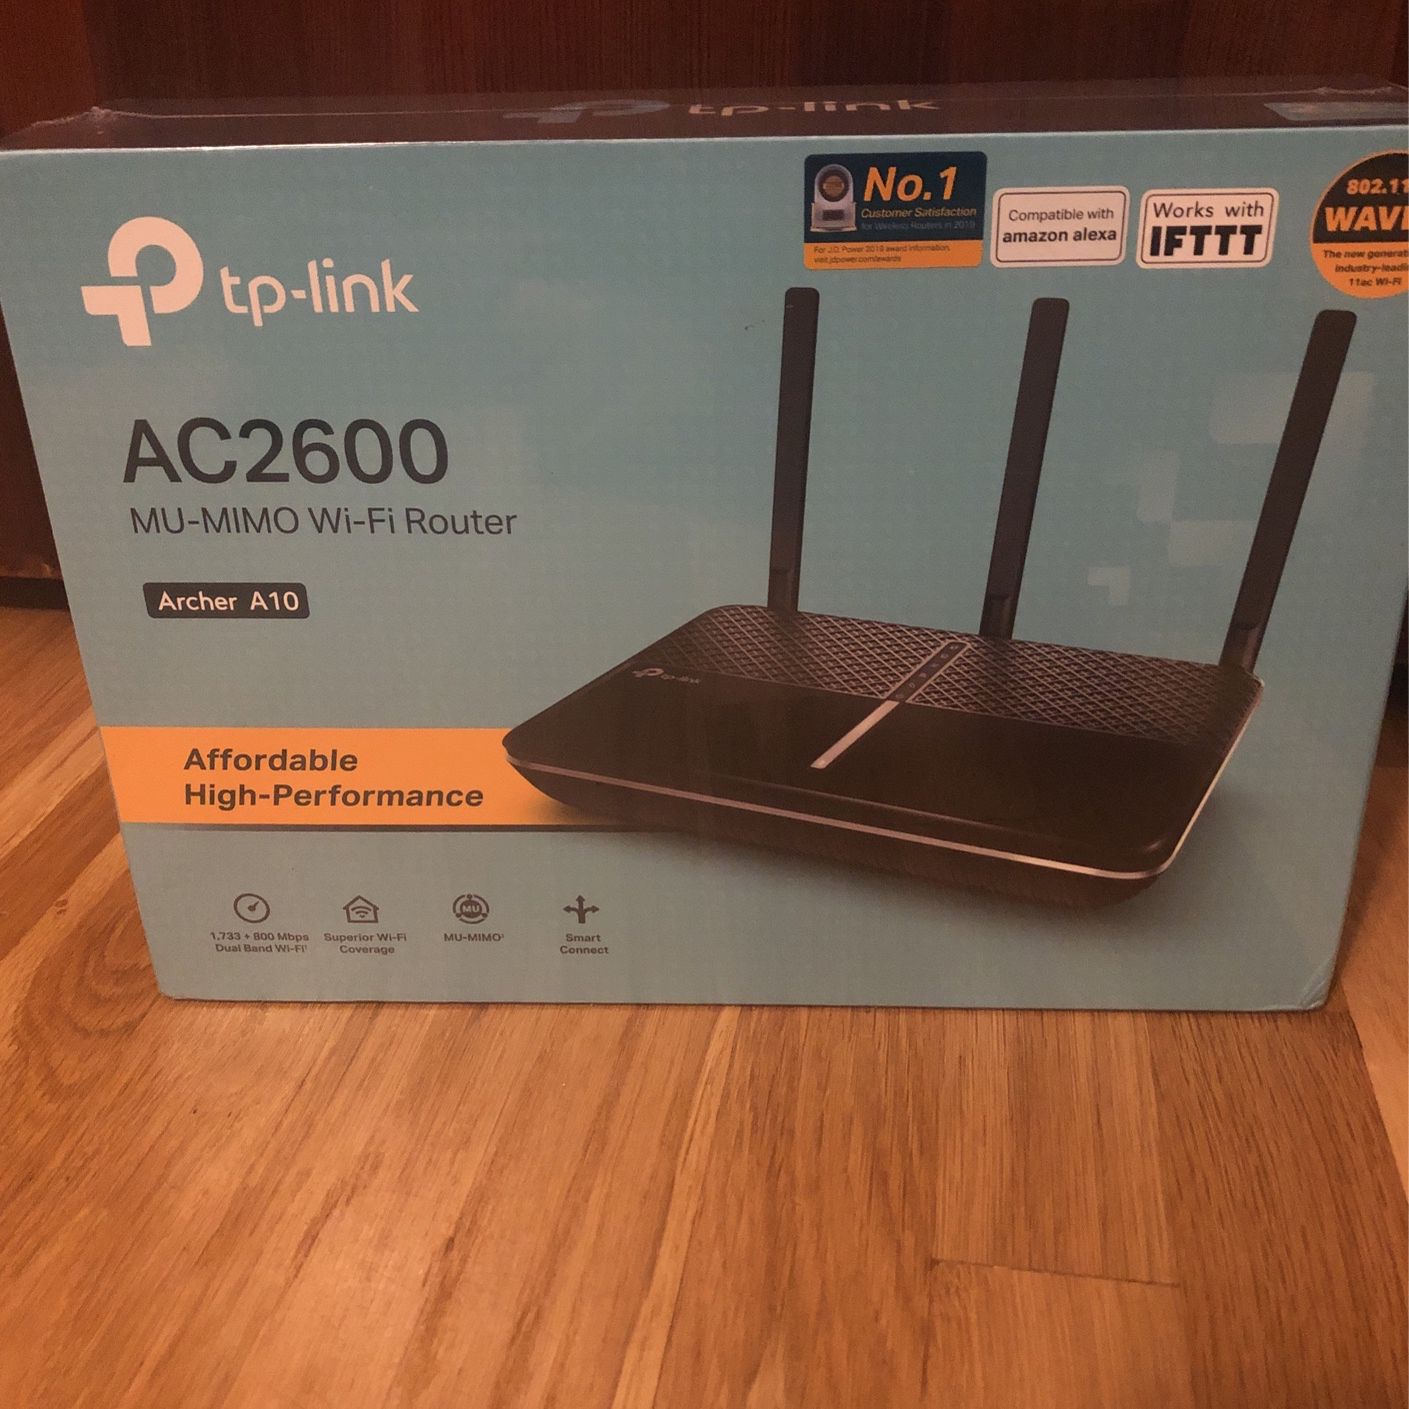 tp-link AC2600 Router